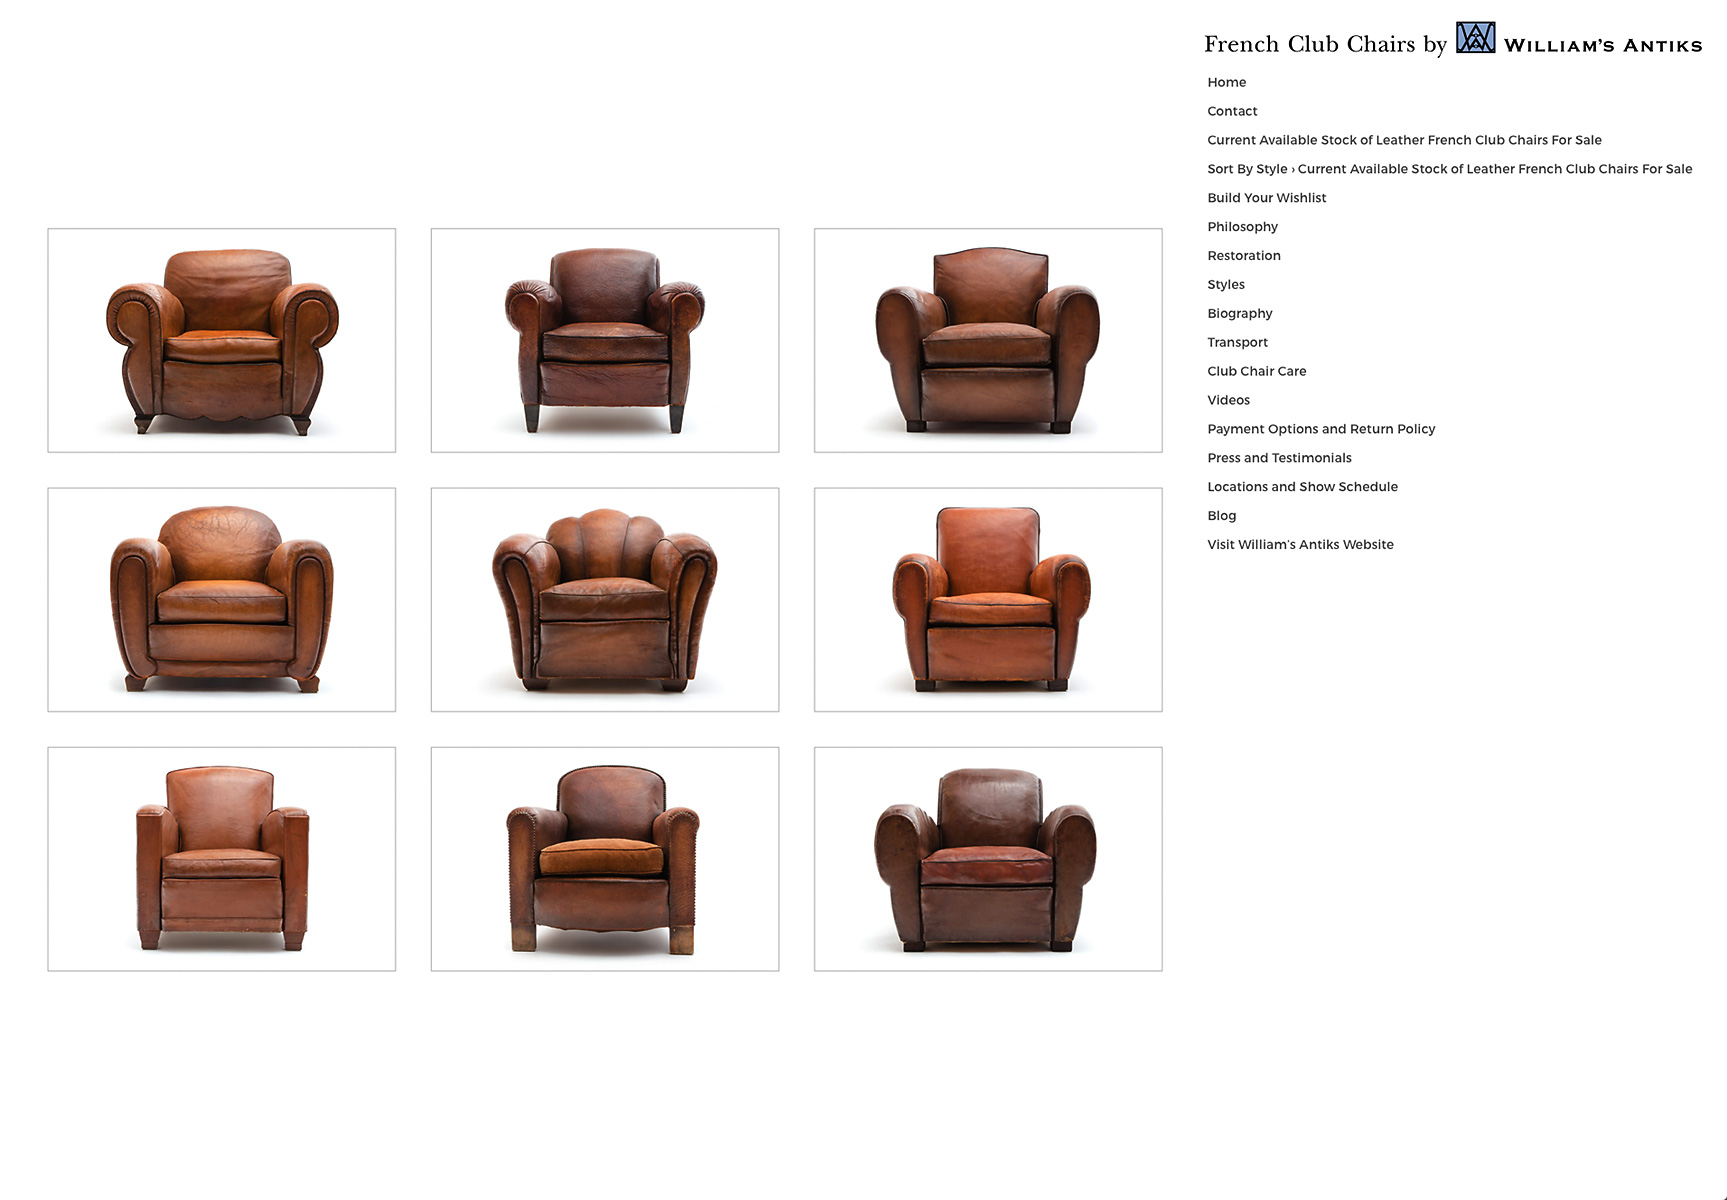 french_club_chairs_website-03-stephen-austin-welch-director-photographer